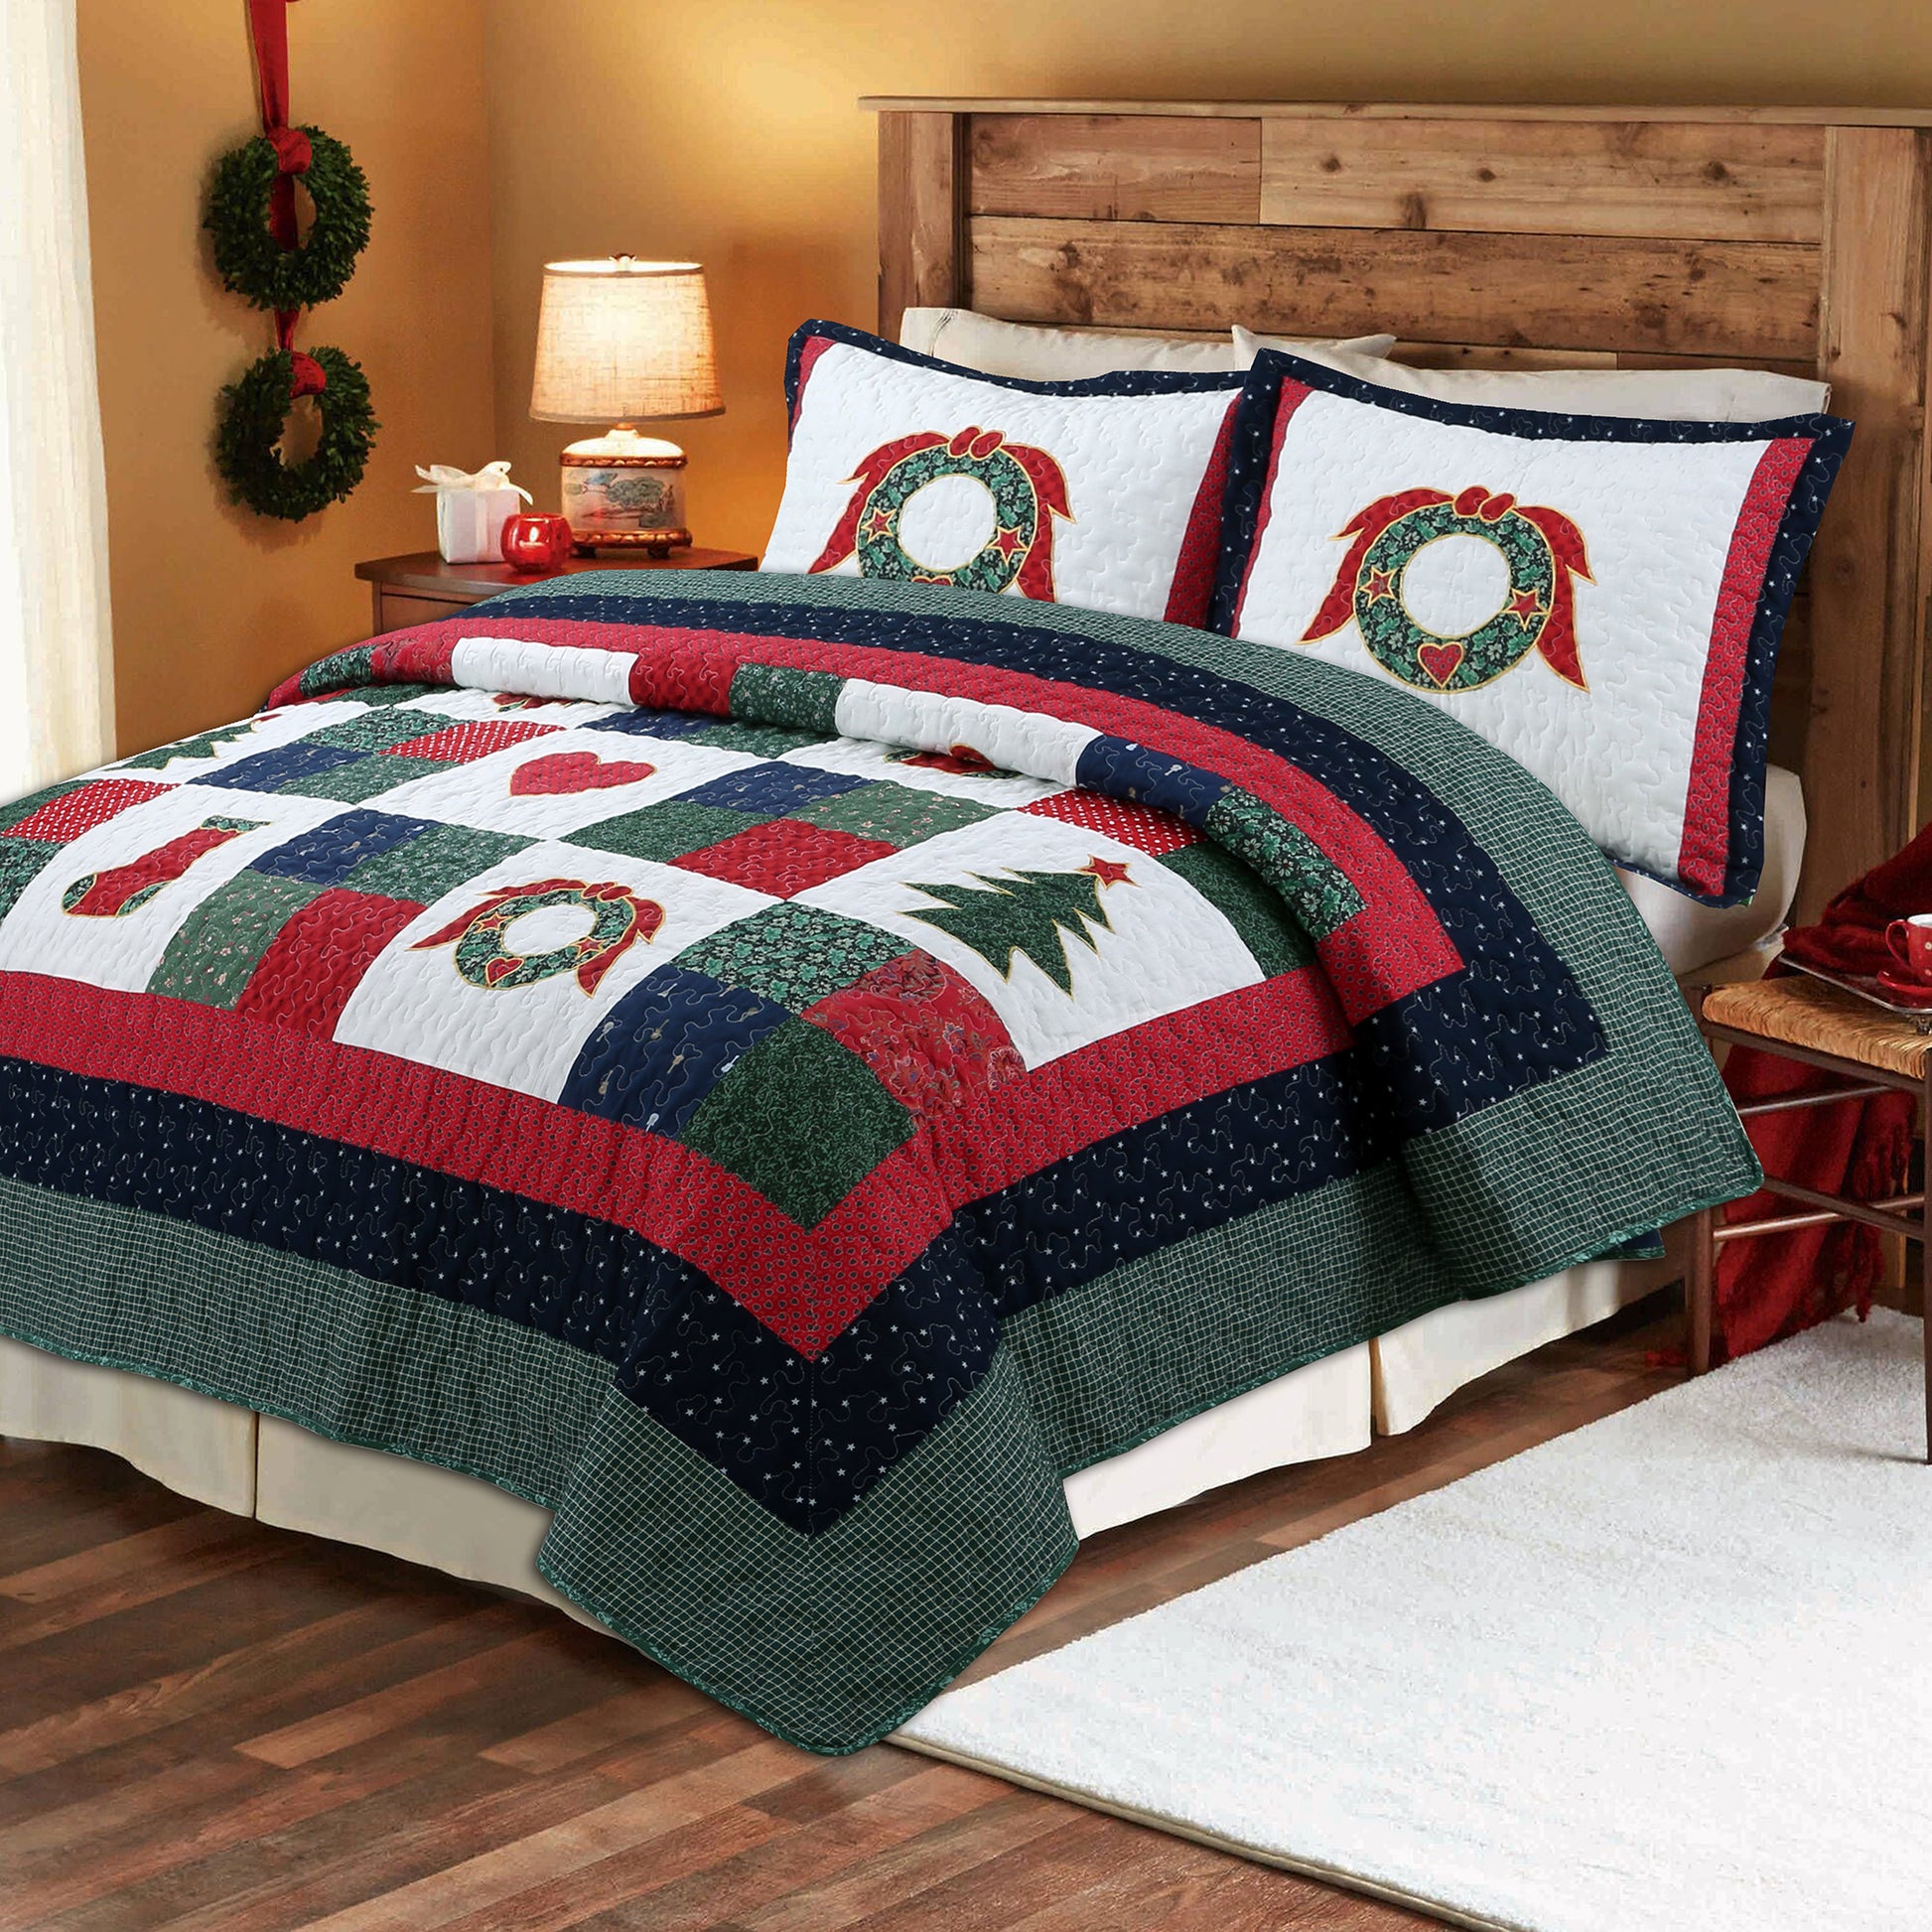 Christmas Quilt Patterns: Christmas Quilts & Blankets for